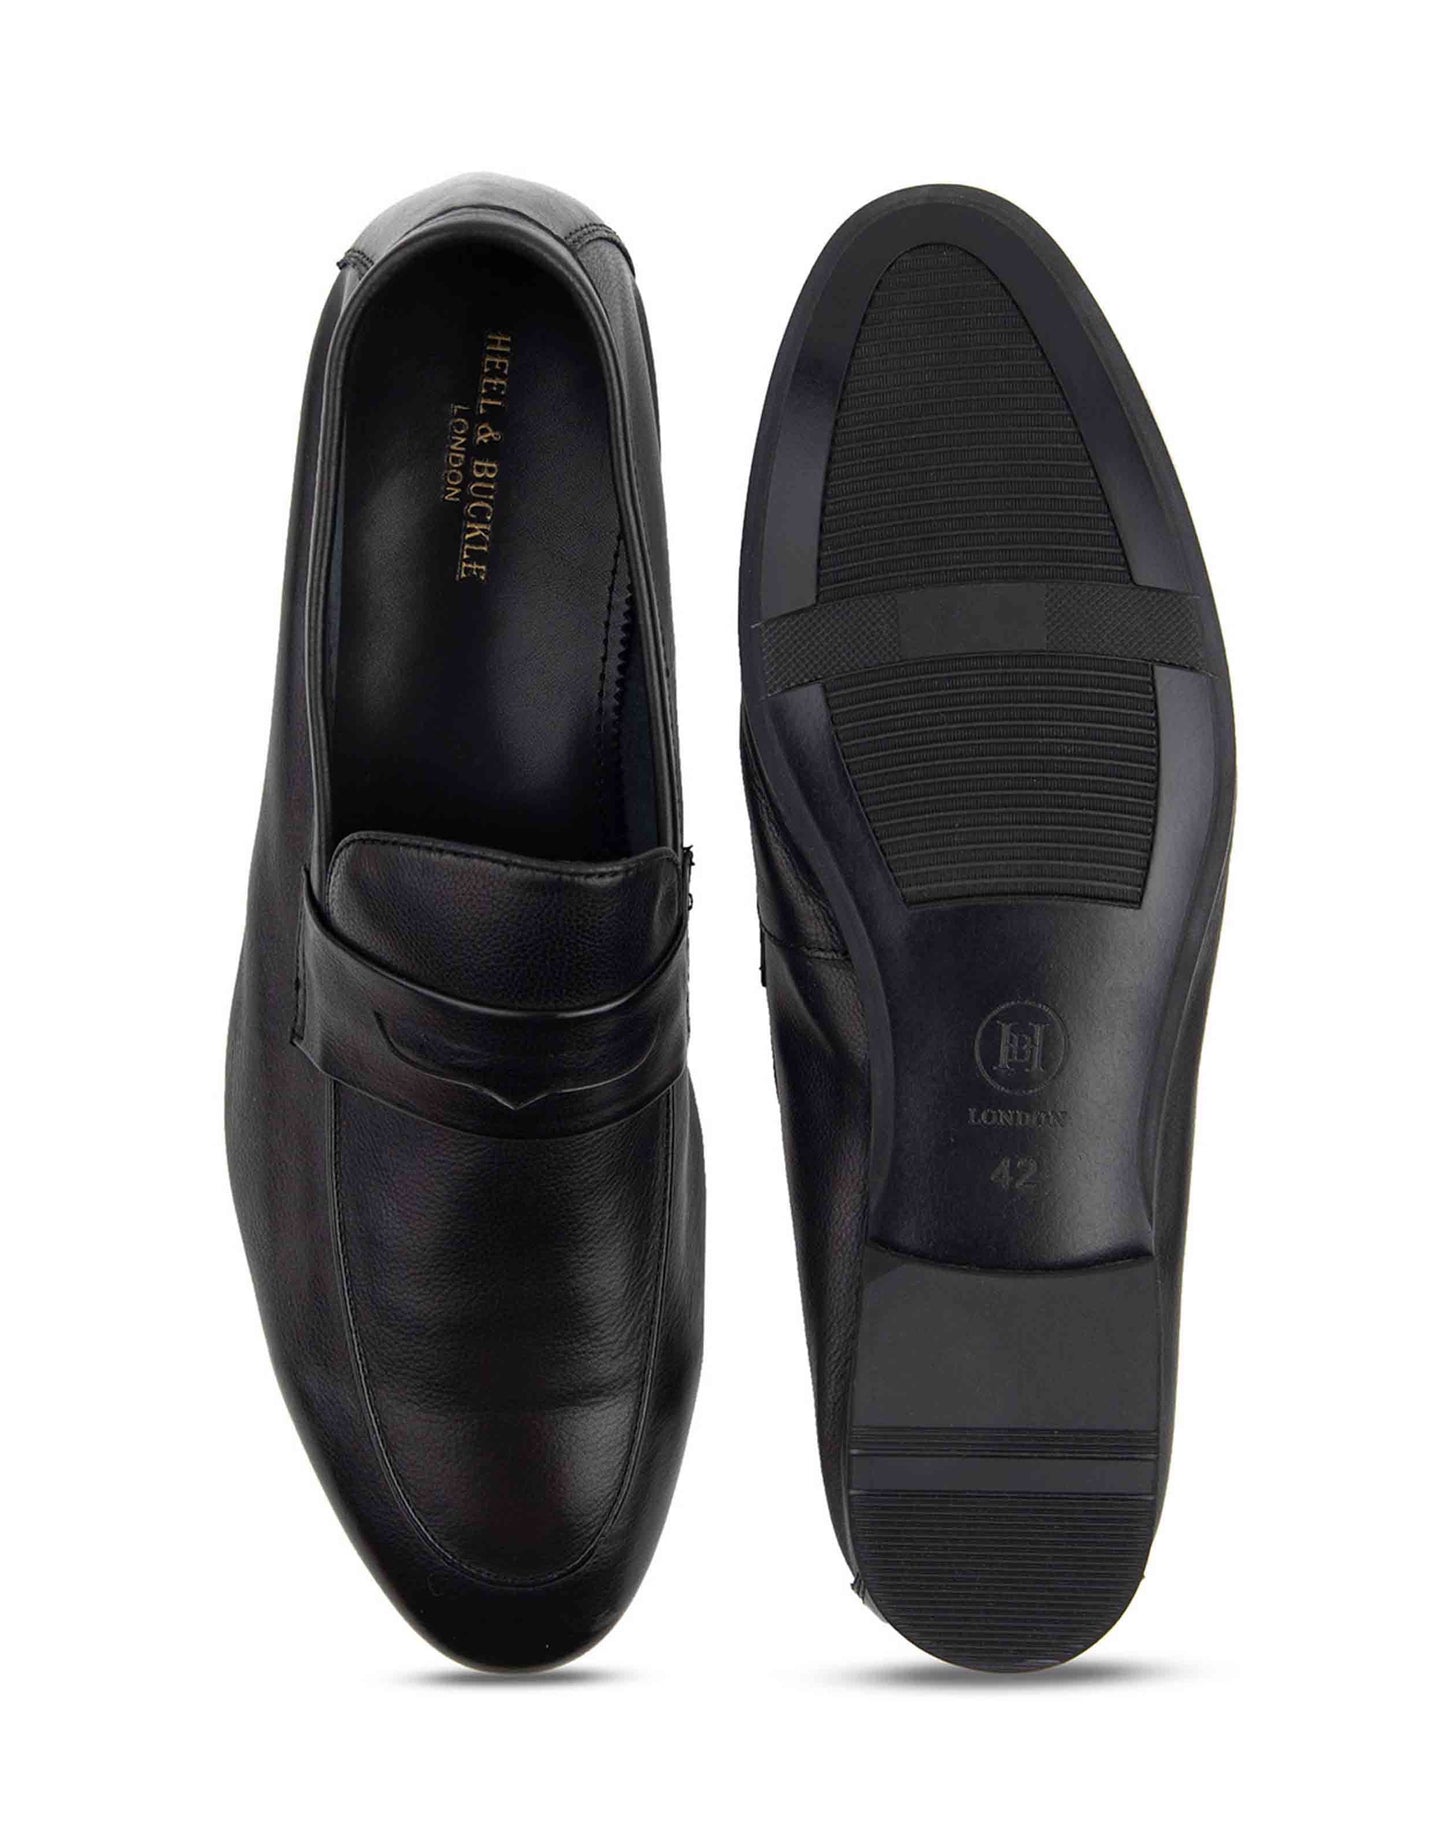 Ascetic Charcoal Loafers